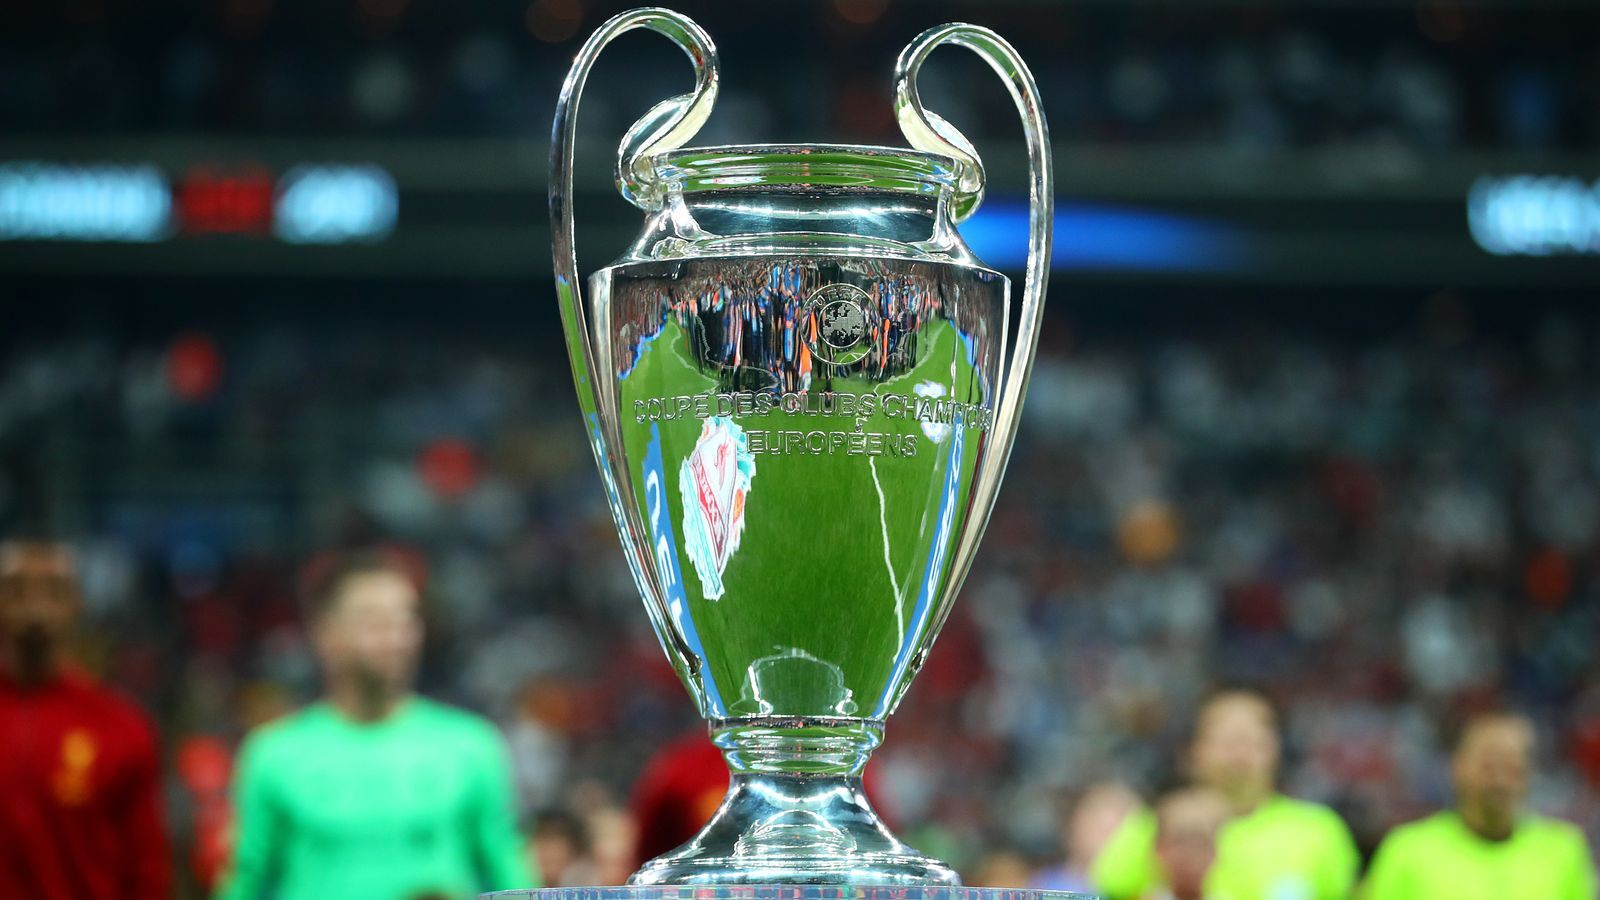 Lisbon Only Needs UEFA’s Permission to Host Final-eight Knockouts of Champions League